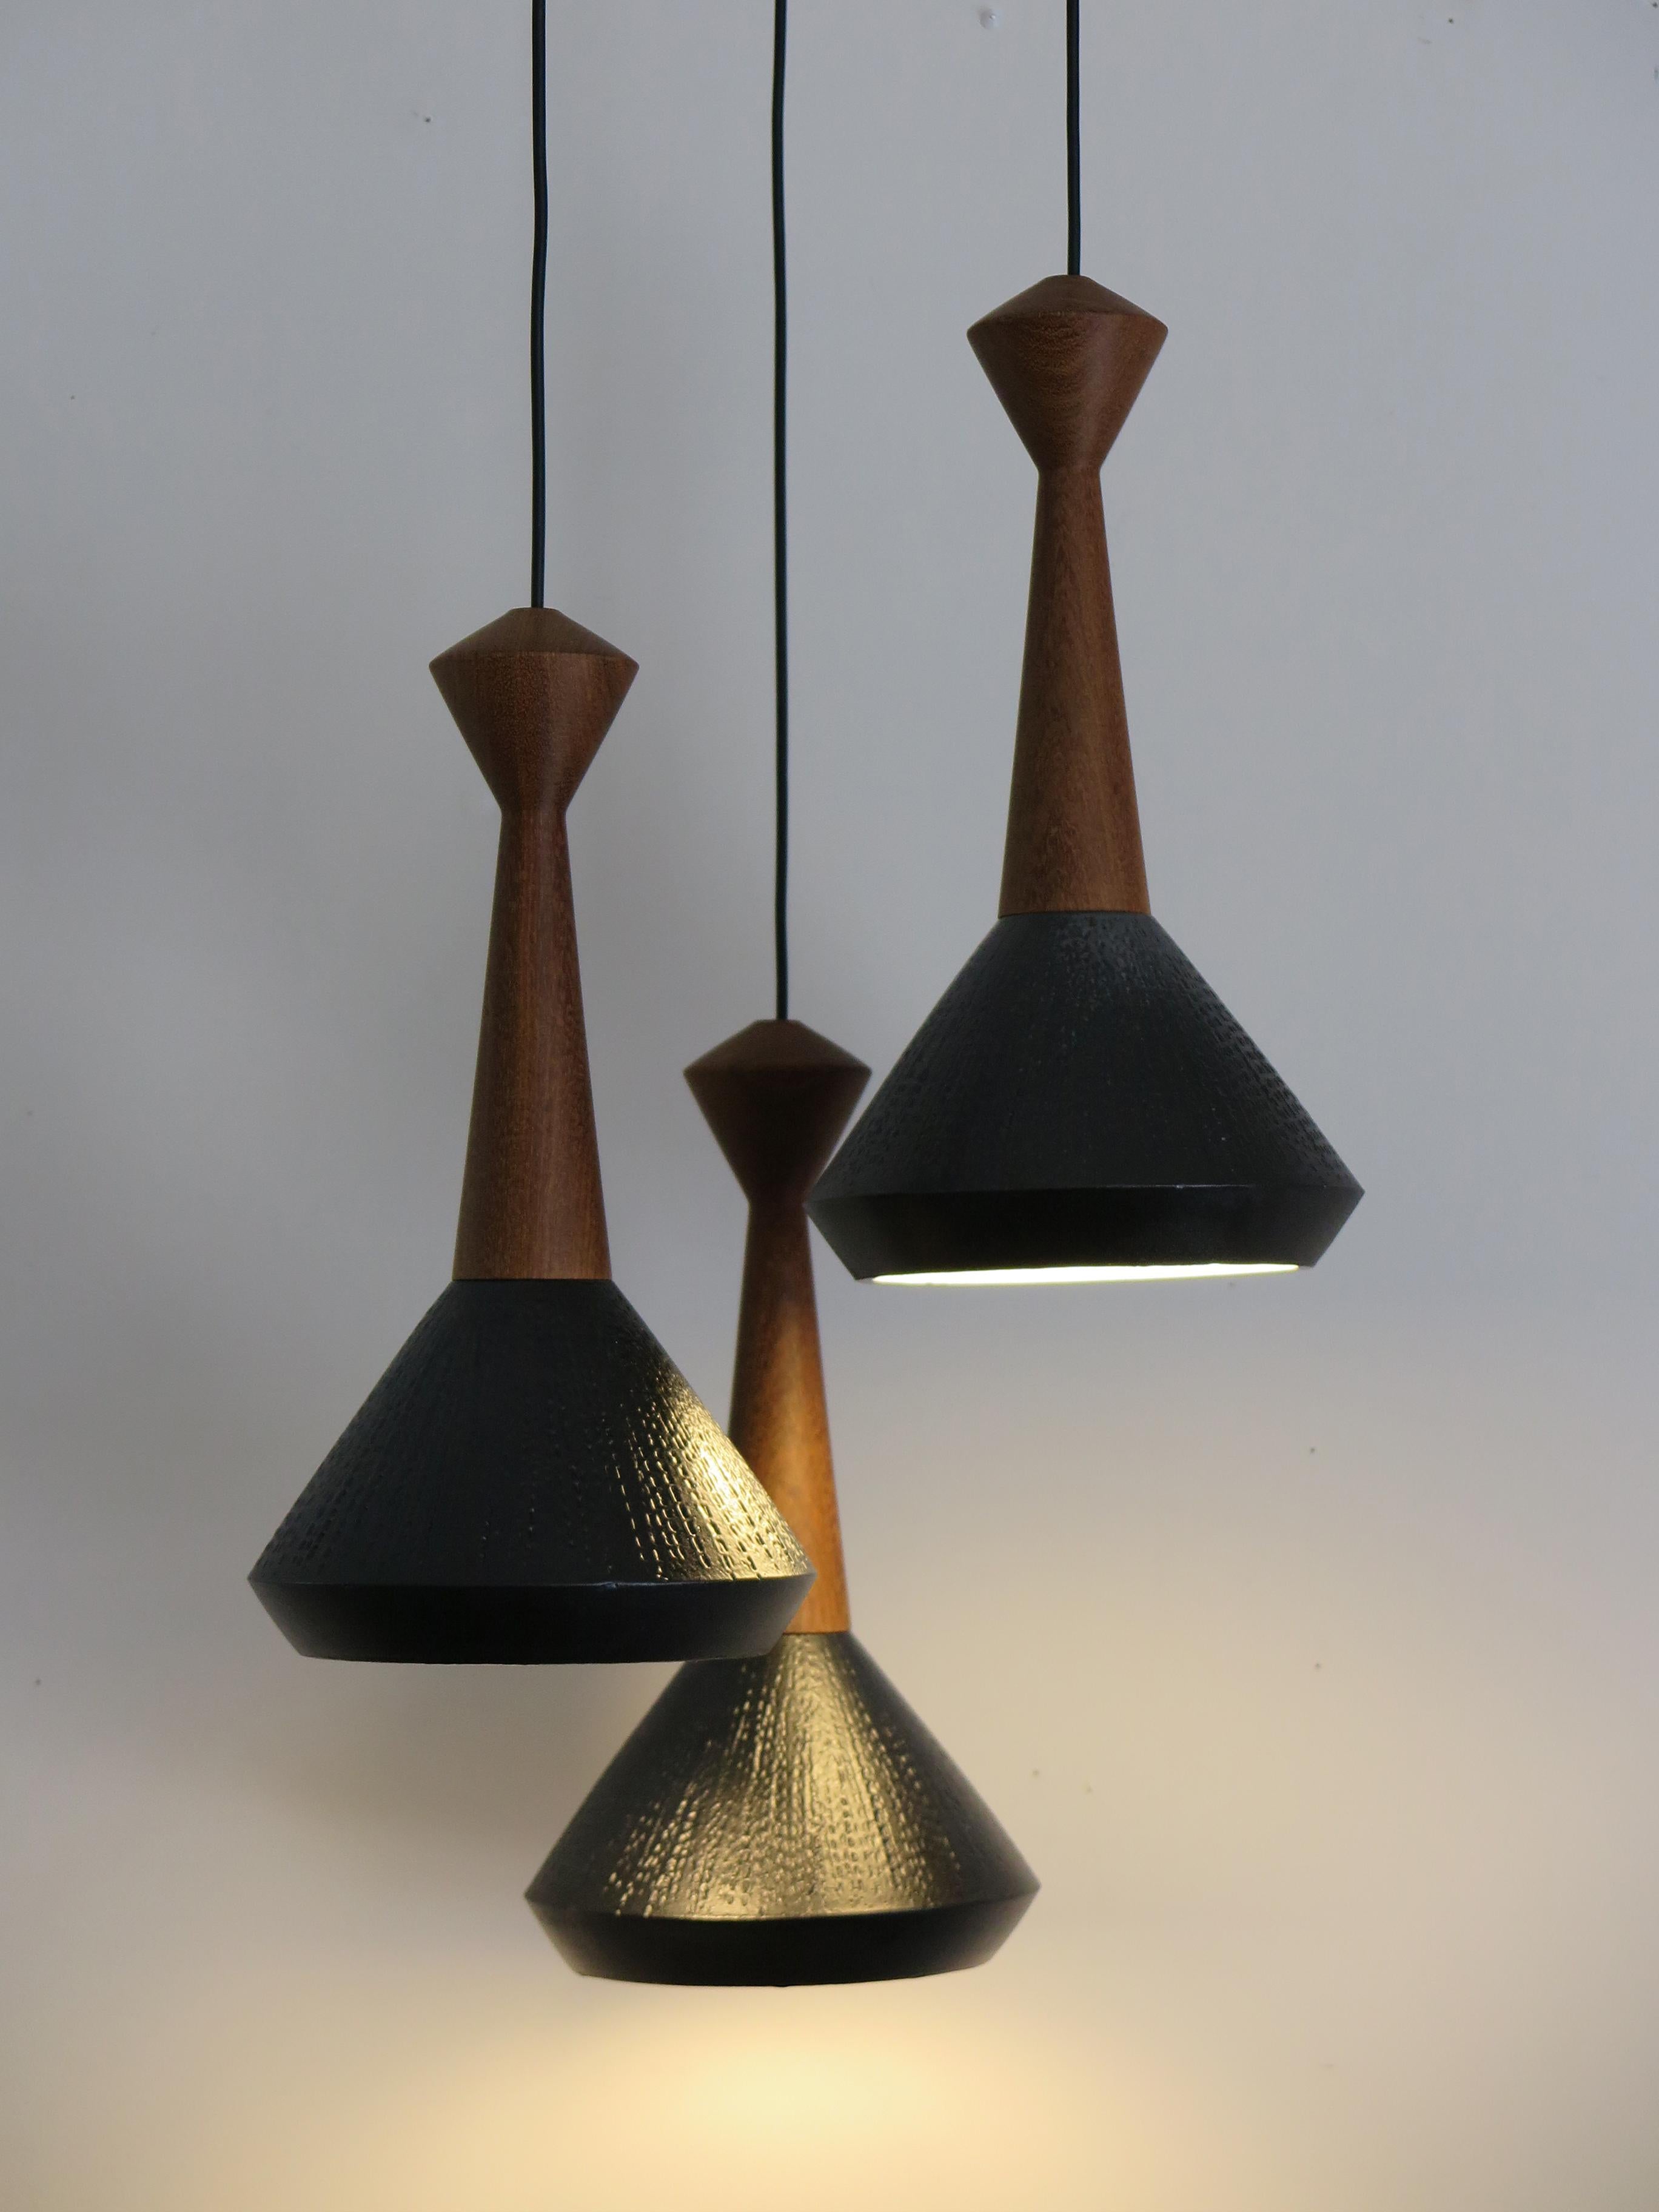 Set ceramic pendant lamps turned and hand-engraved with matte black enamel with wood details, new contemporary design Capperidicasa.
Single lamp measures: Height 44 cm, diameter 24 cm.